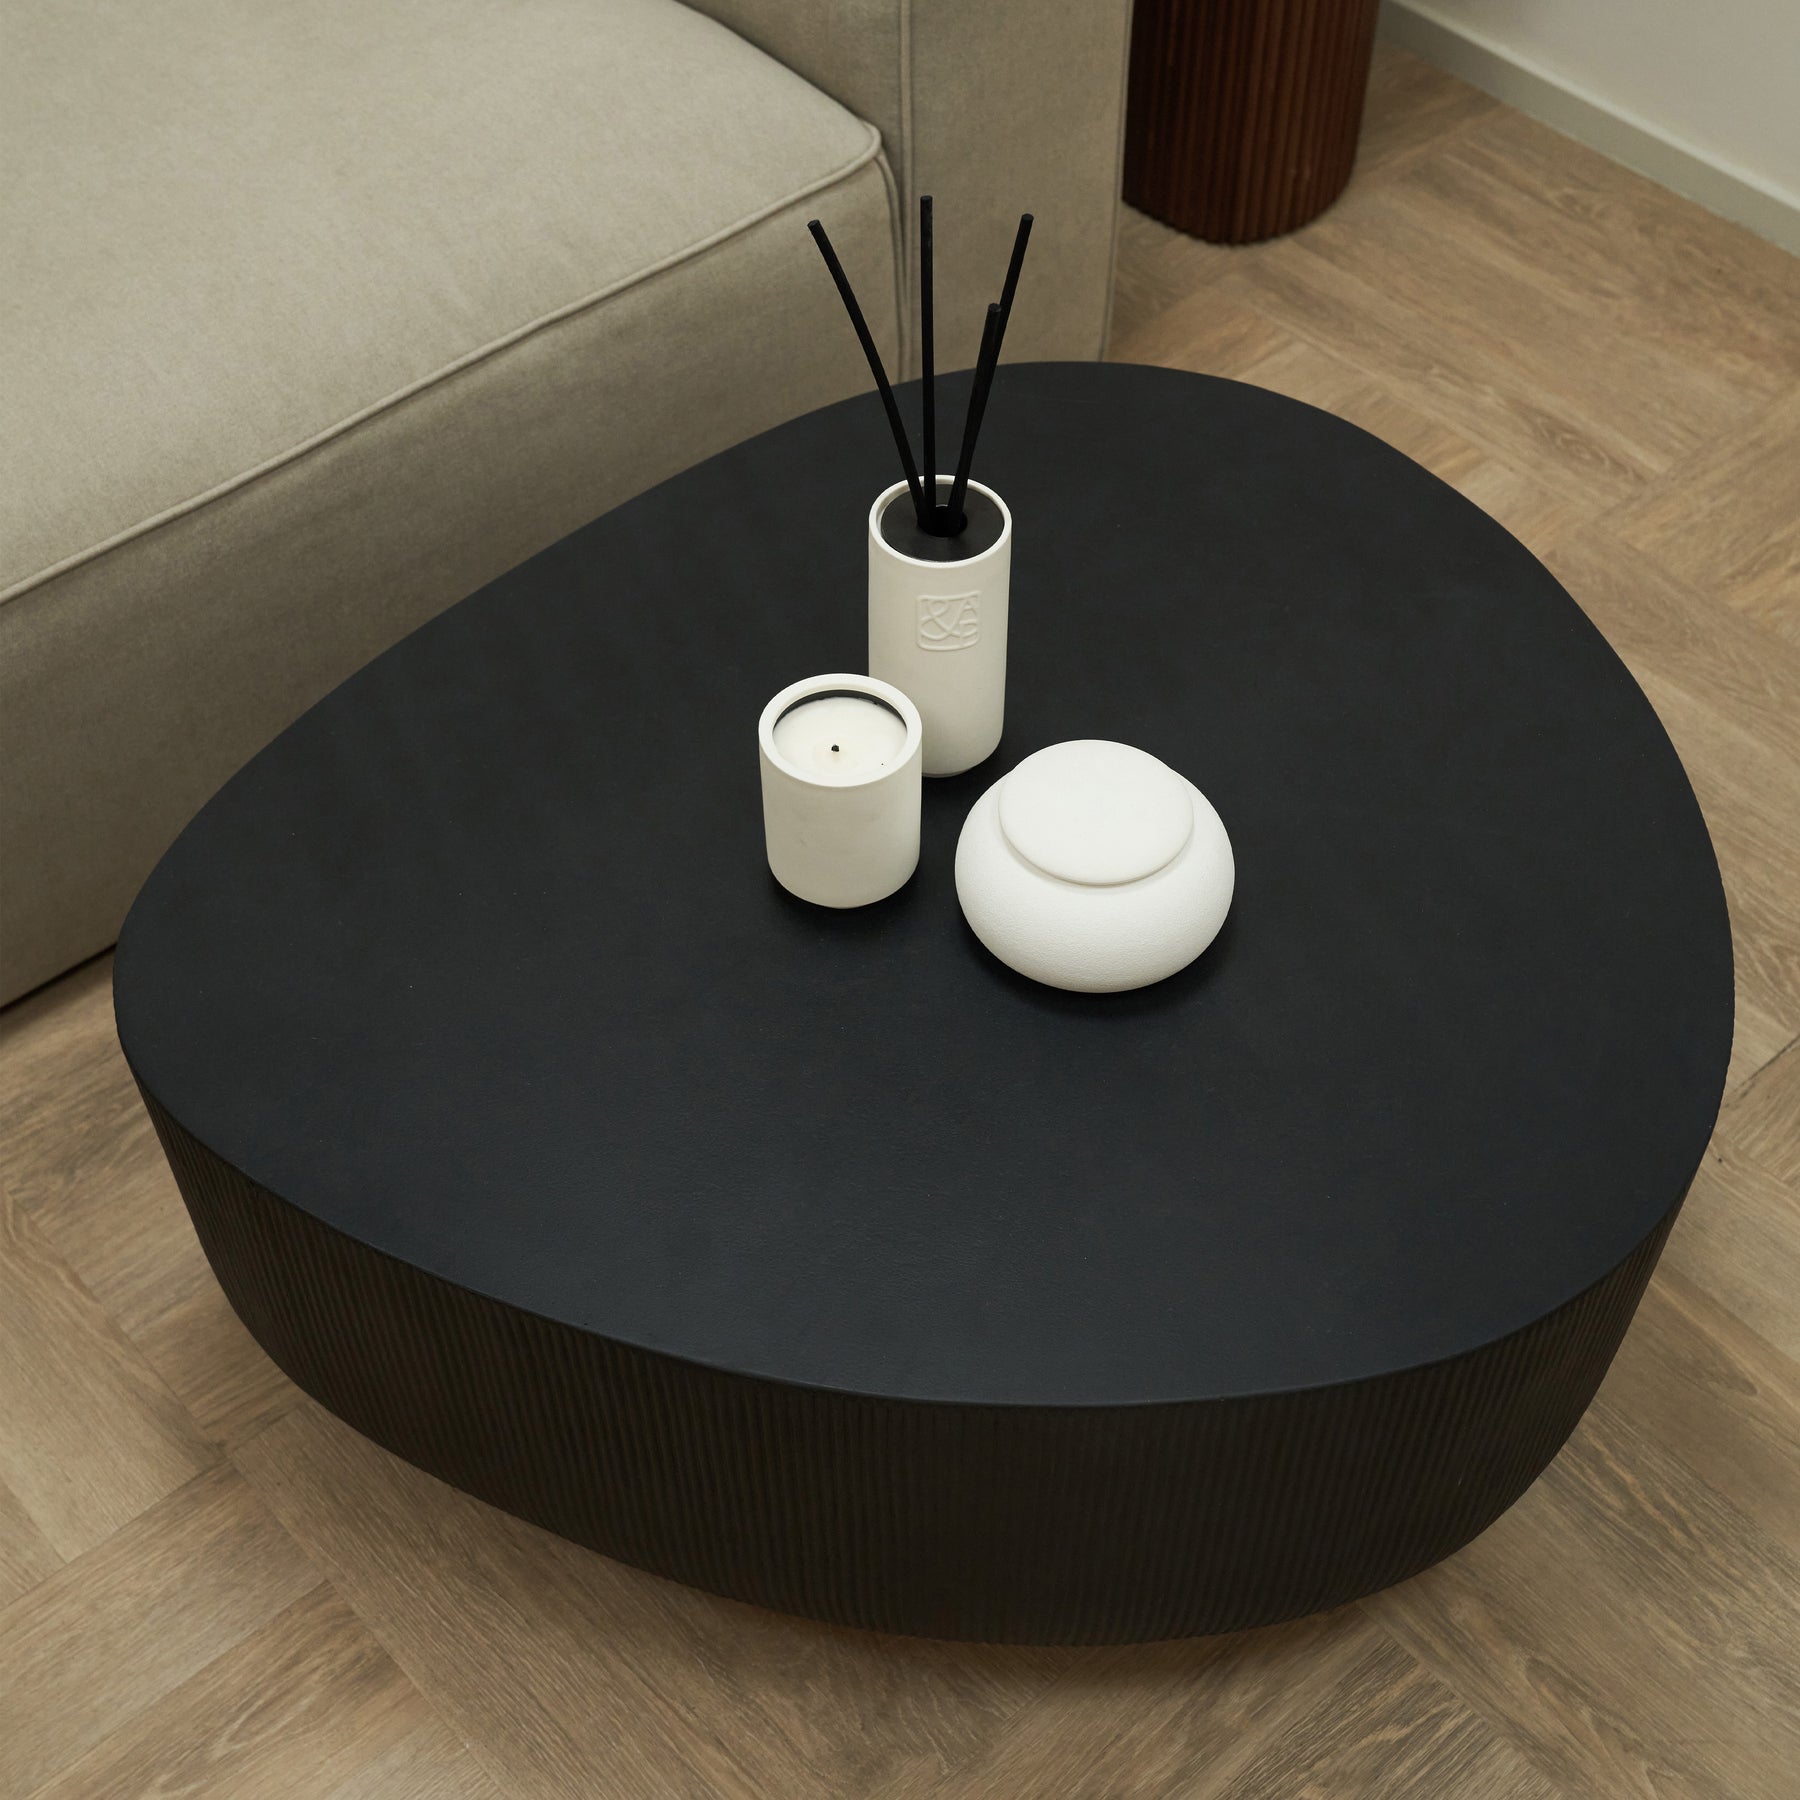 Minimal Onyx Irregular Shaped Coffee Table Large adorned with candles, pots, and incense